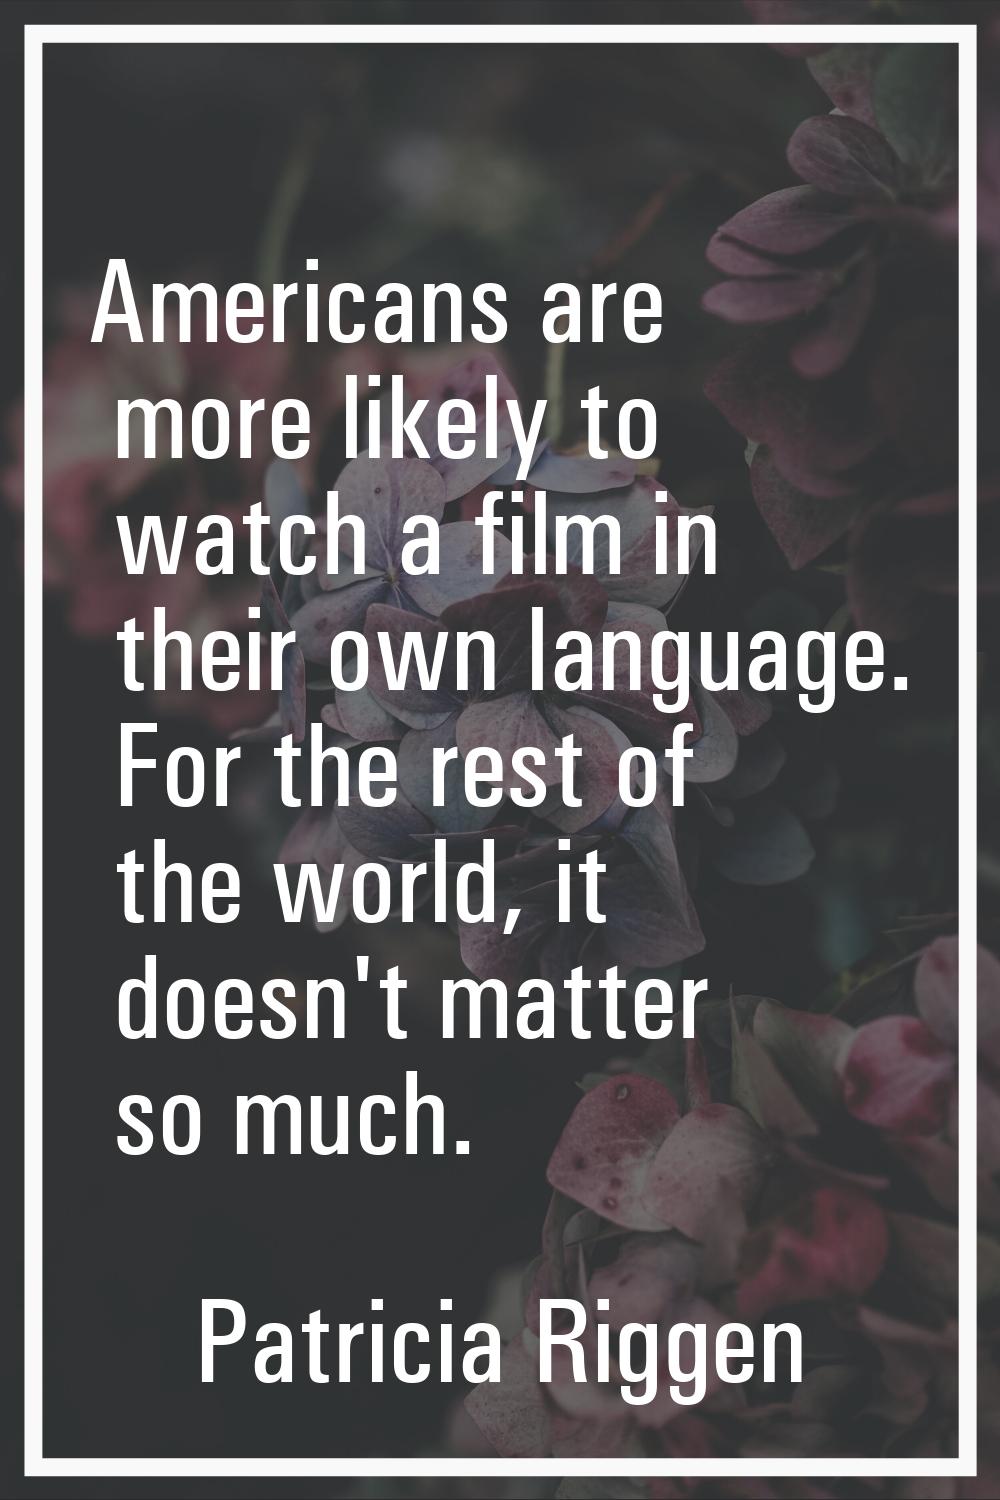 Americans are more likely to watch a film in their own language. For the rest of the world, it does